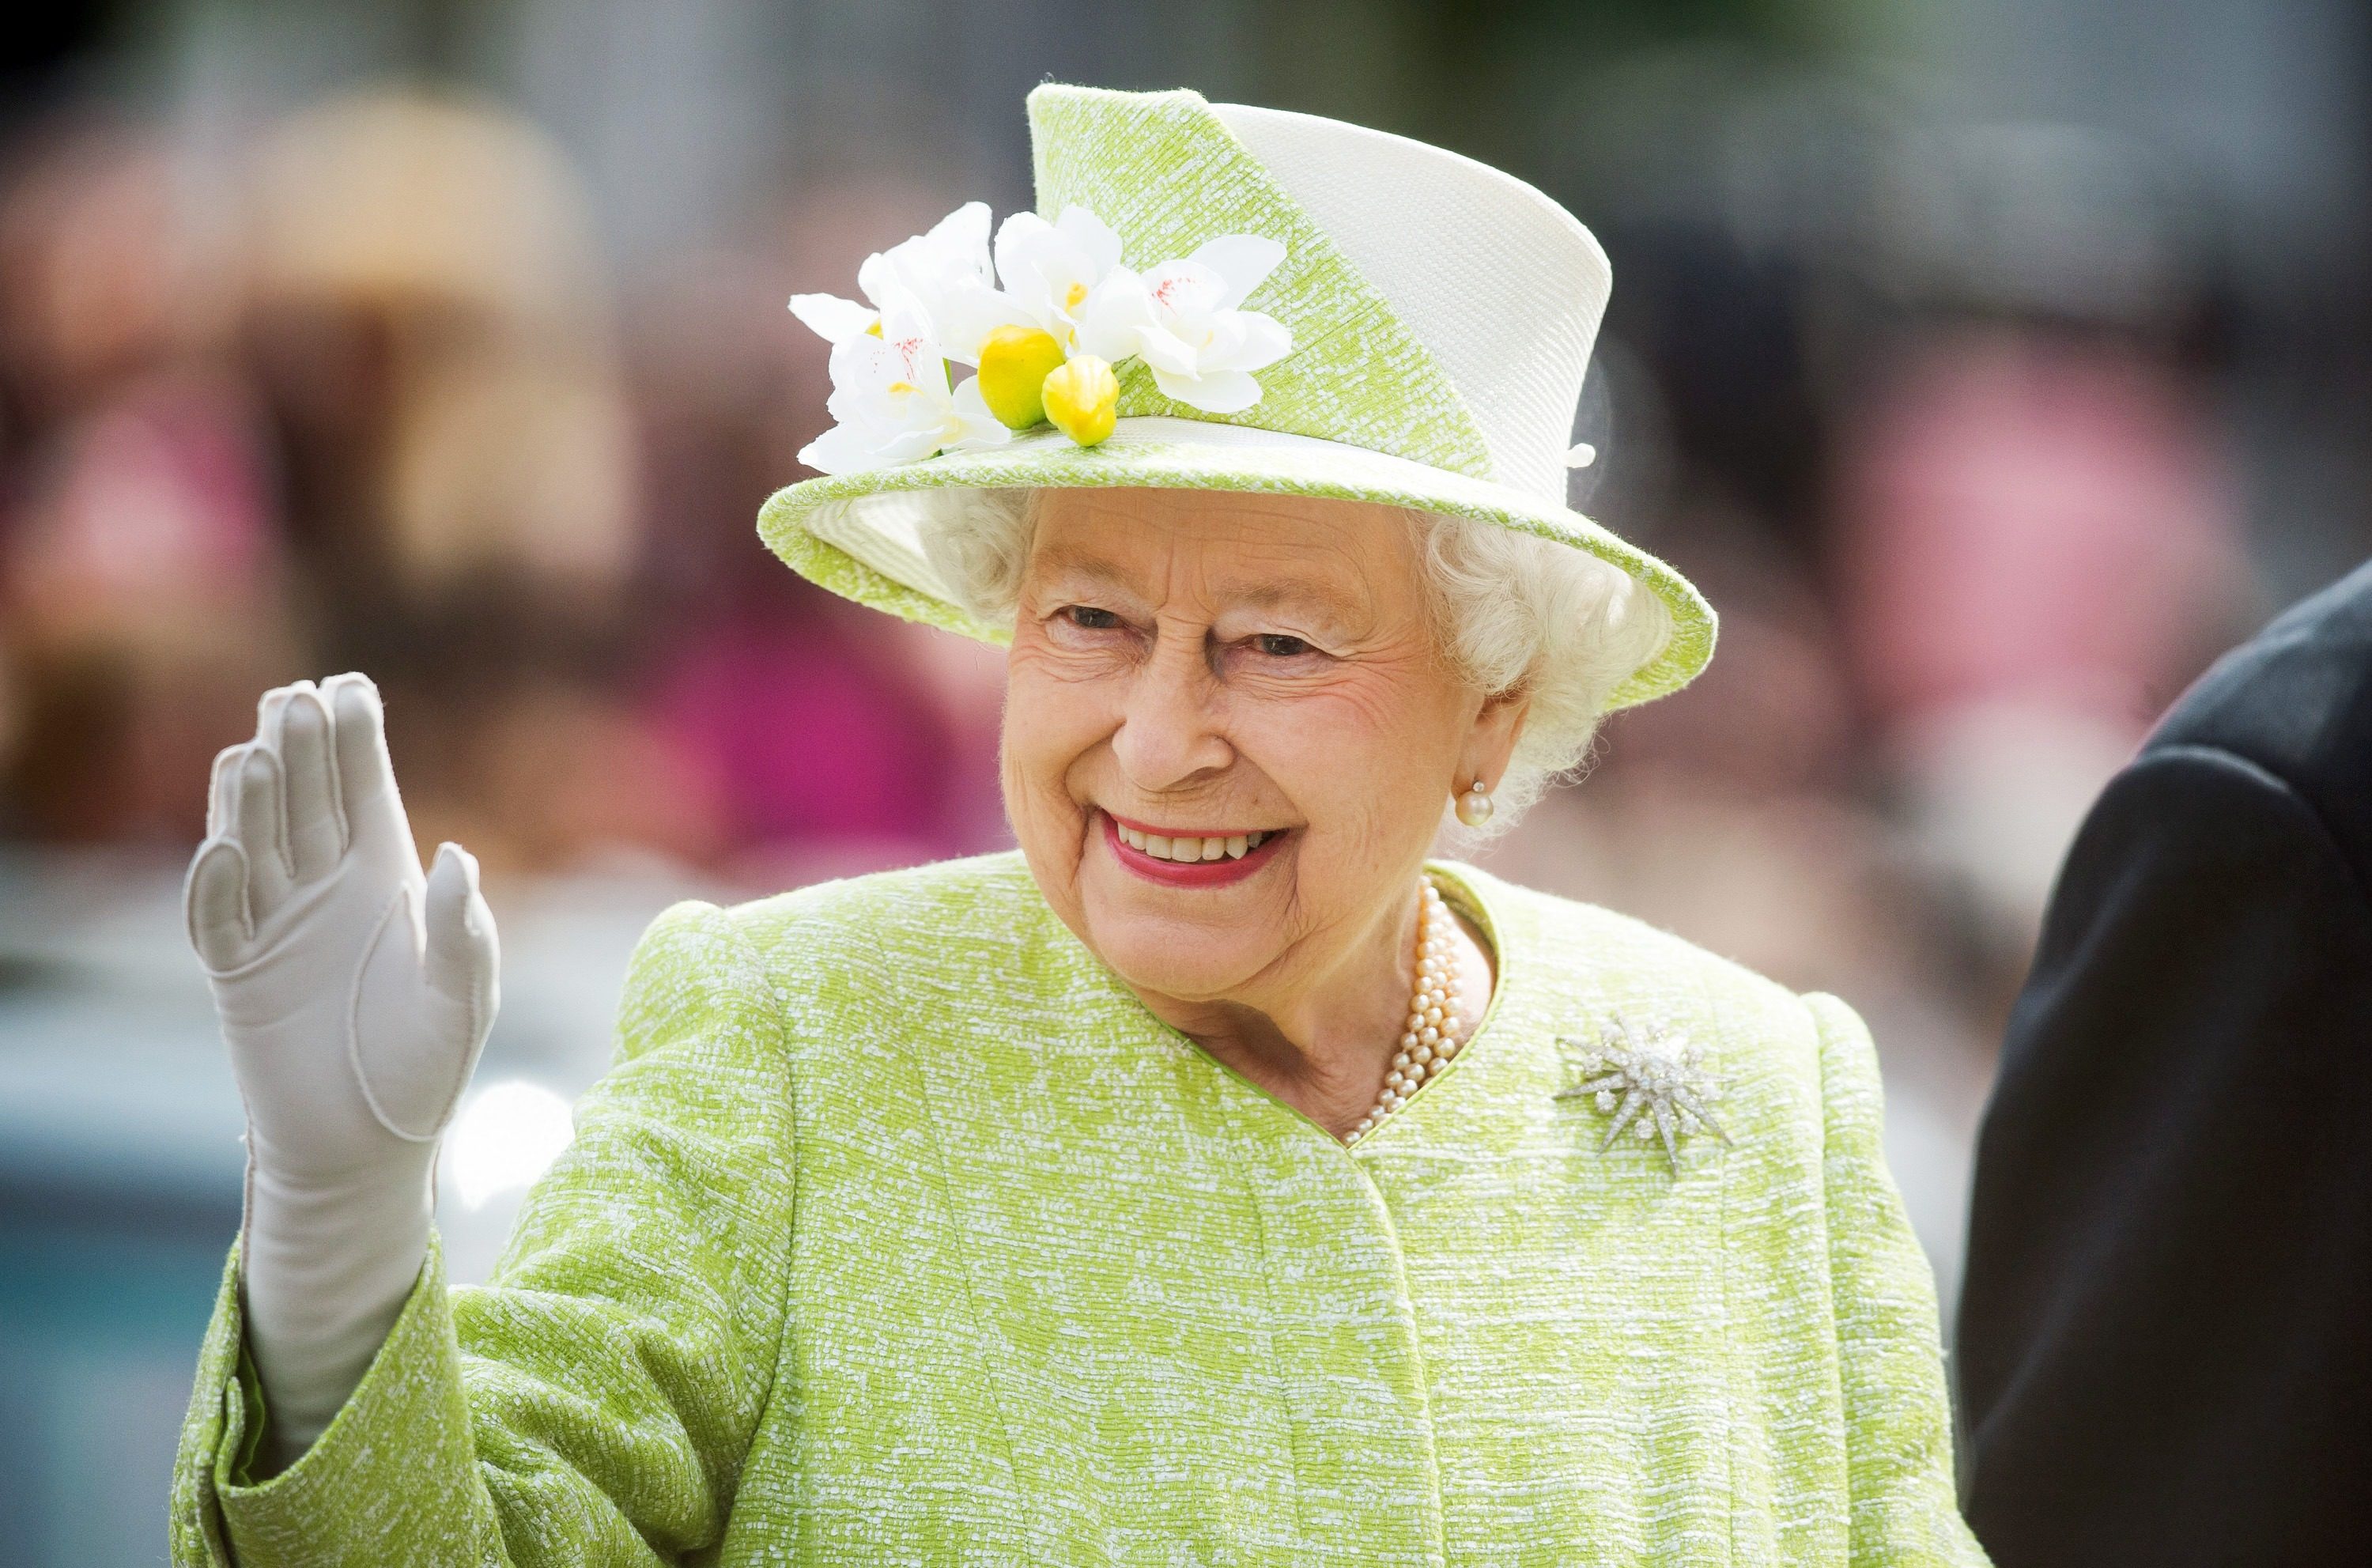 Queen Elizabeth II waves to the crowd in Windsor, England, on her 90th birthday in April 2016, but how does she spend the millions given her in the Sovereign Grant? Photo: WireImage